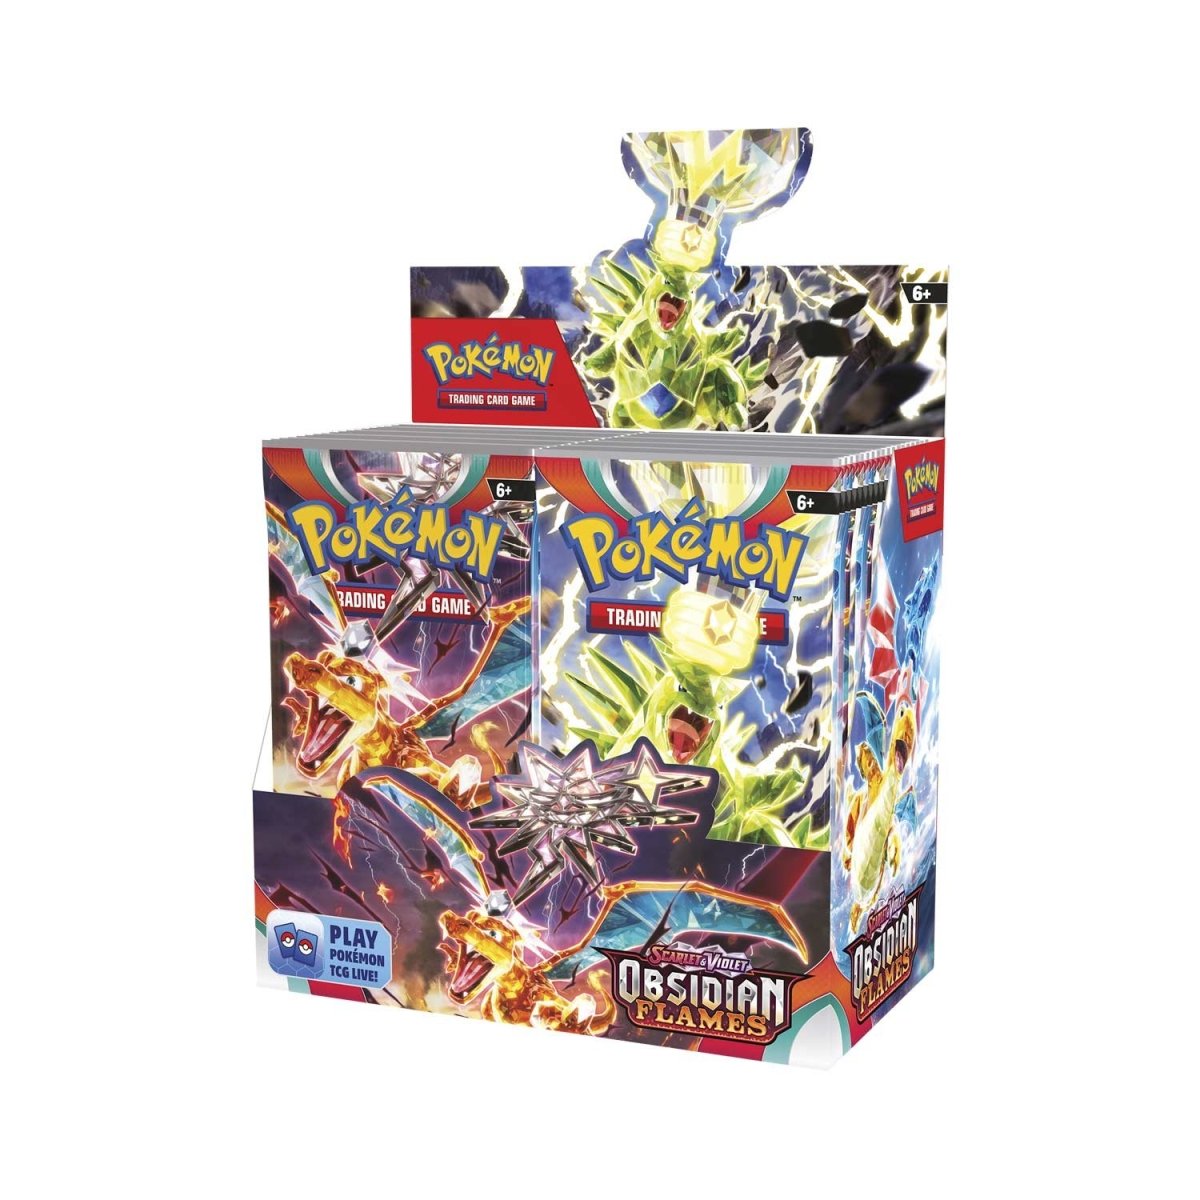 Pokemon Scarlet and Violet Obsidian Flames Booster Box | D20 Games